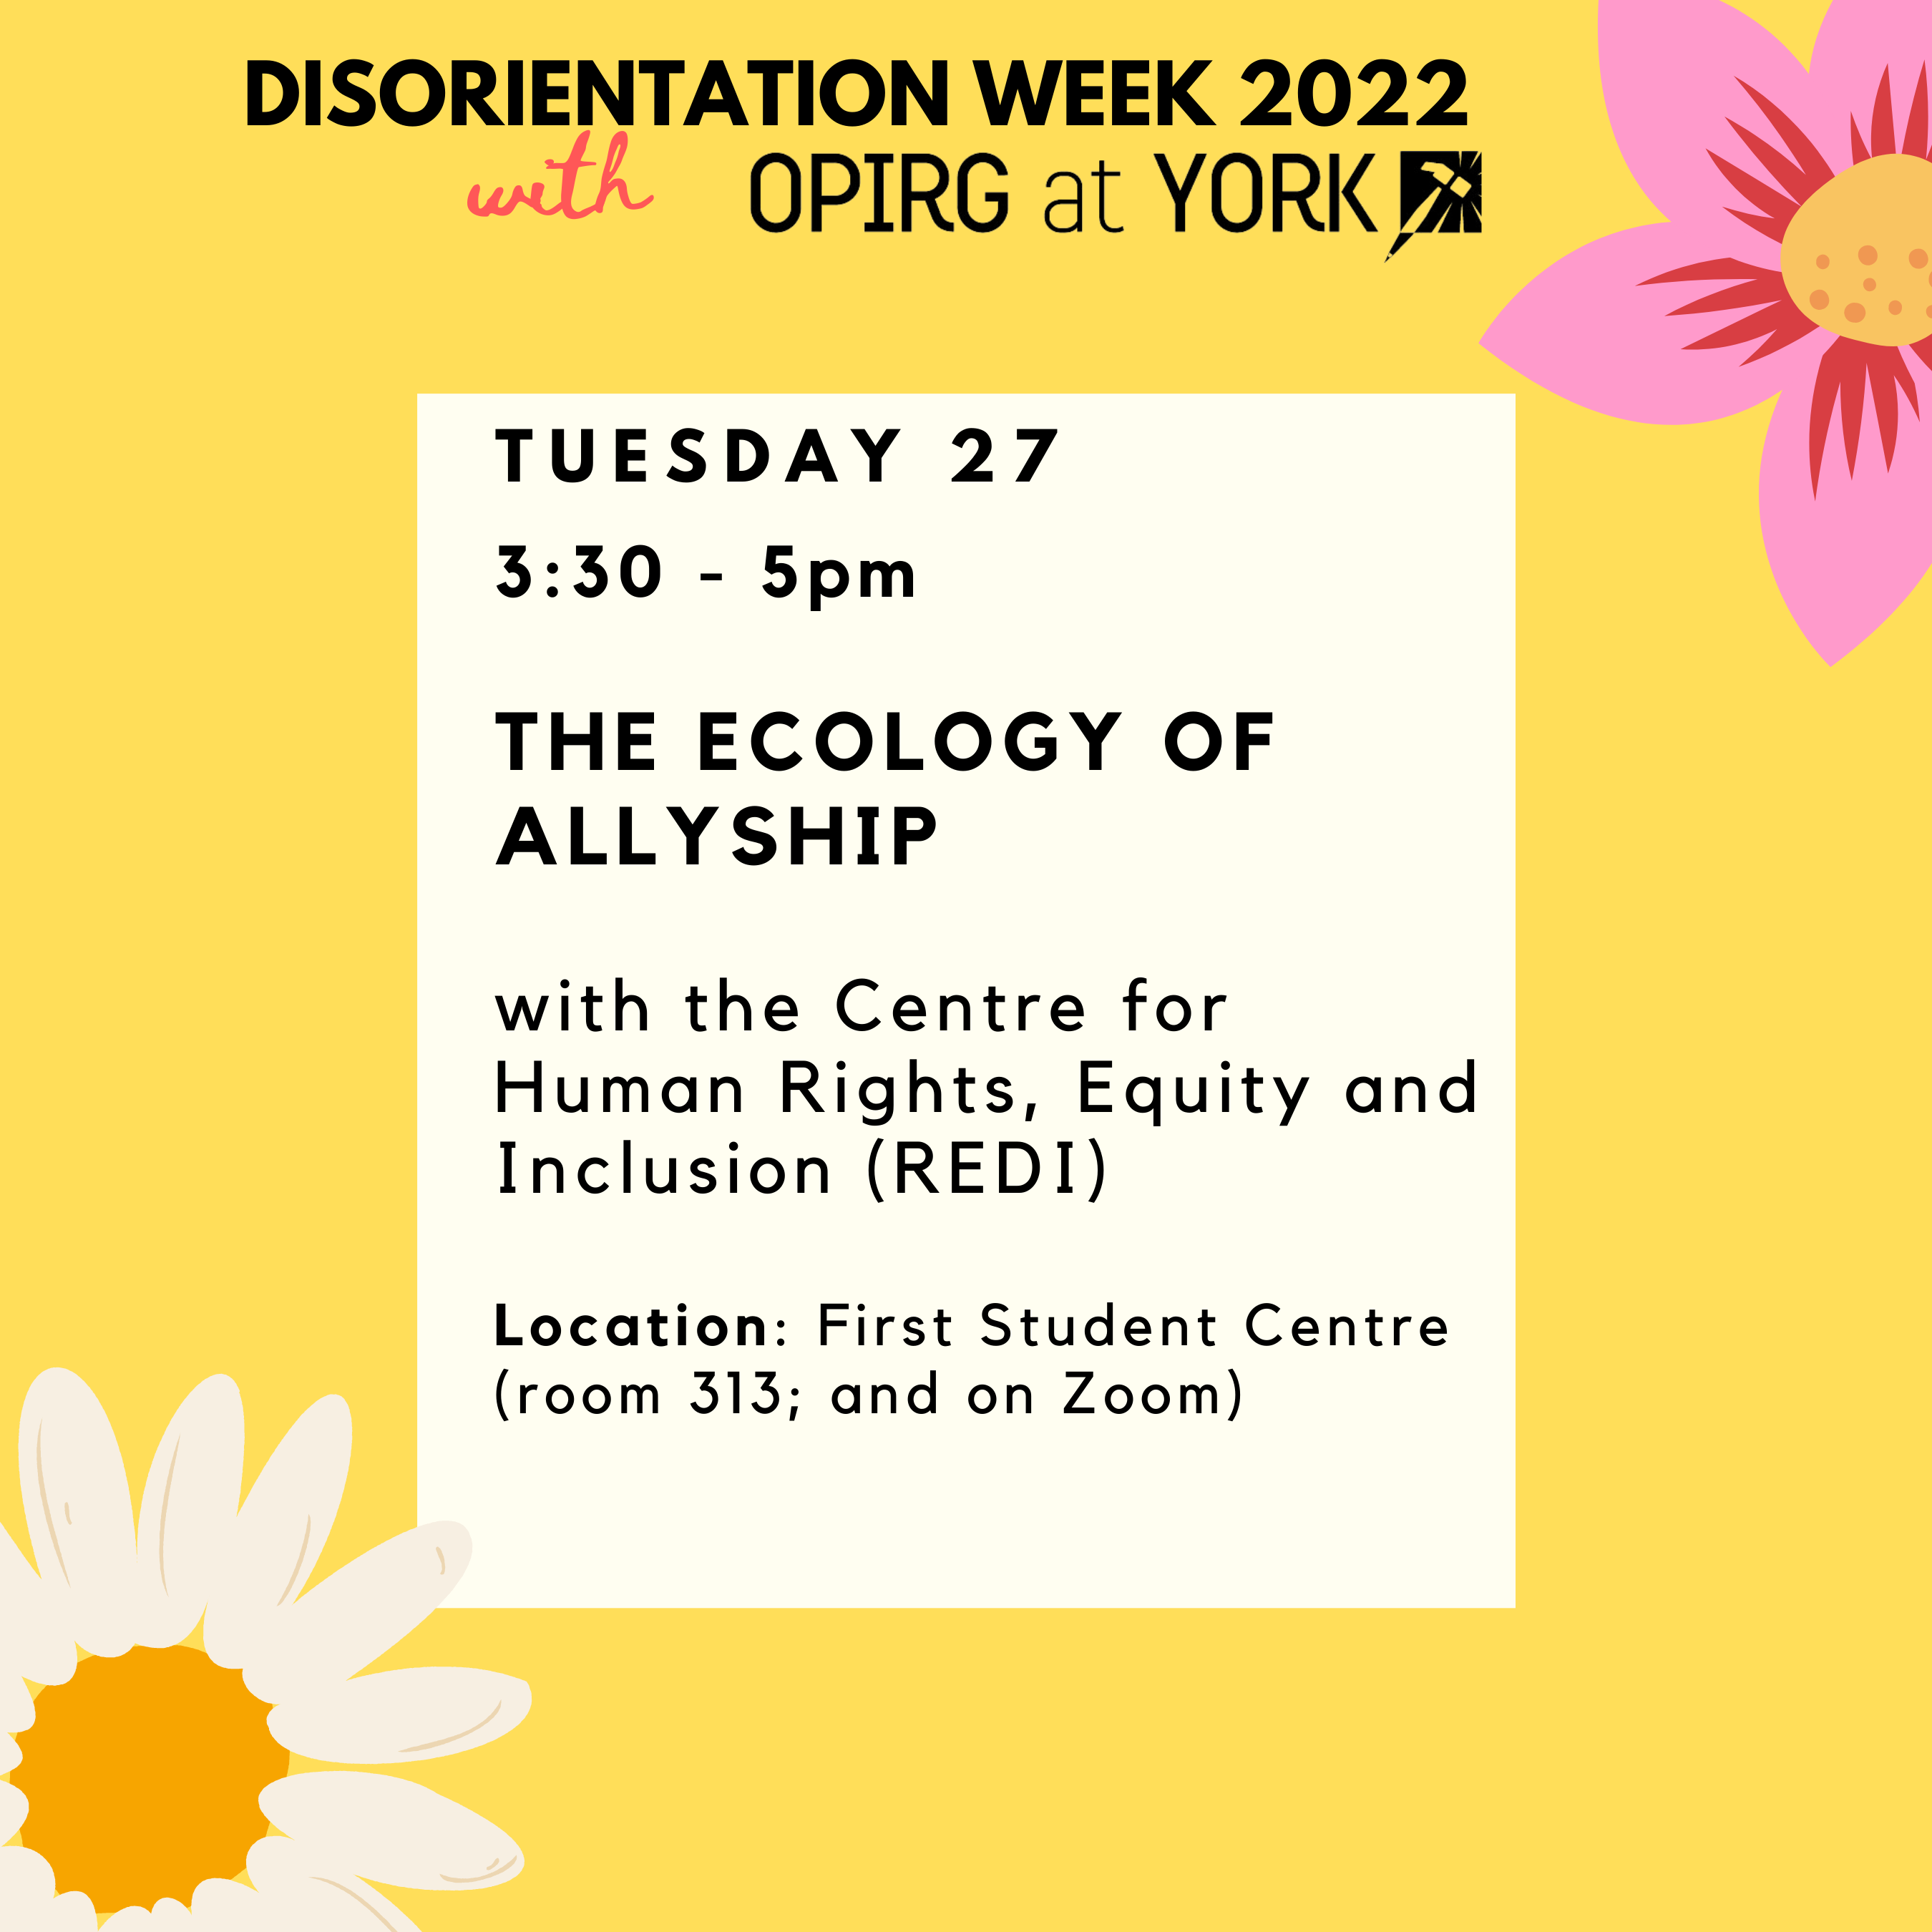 Tuesday 27, 3:30 - 5pm  The Ecology of allyship  with the Centre for Human Rights, Equity and Inclusion (REDI)  Location: First Student Centre (room 313; and on Zoom).  Black text on white block with yellow border. Pink flowers in the corners.